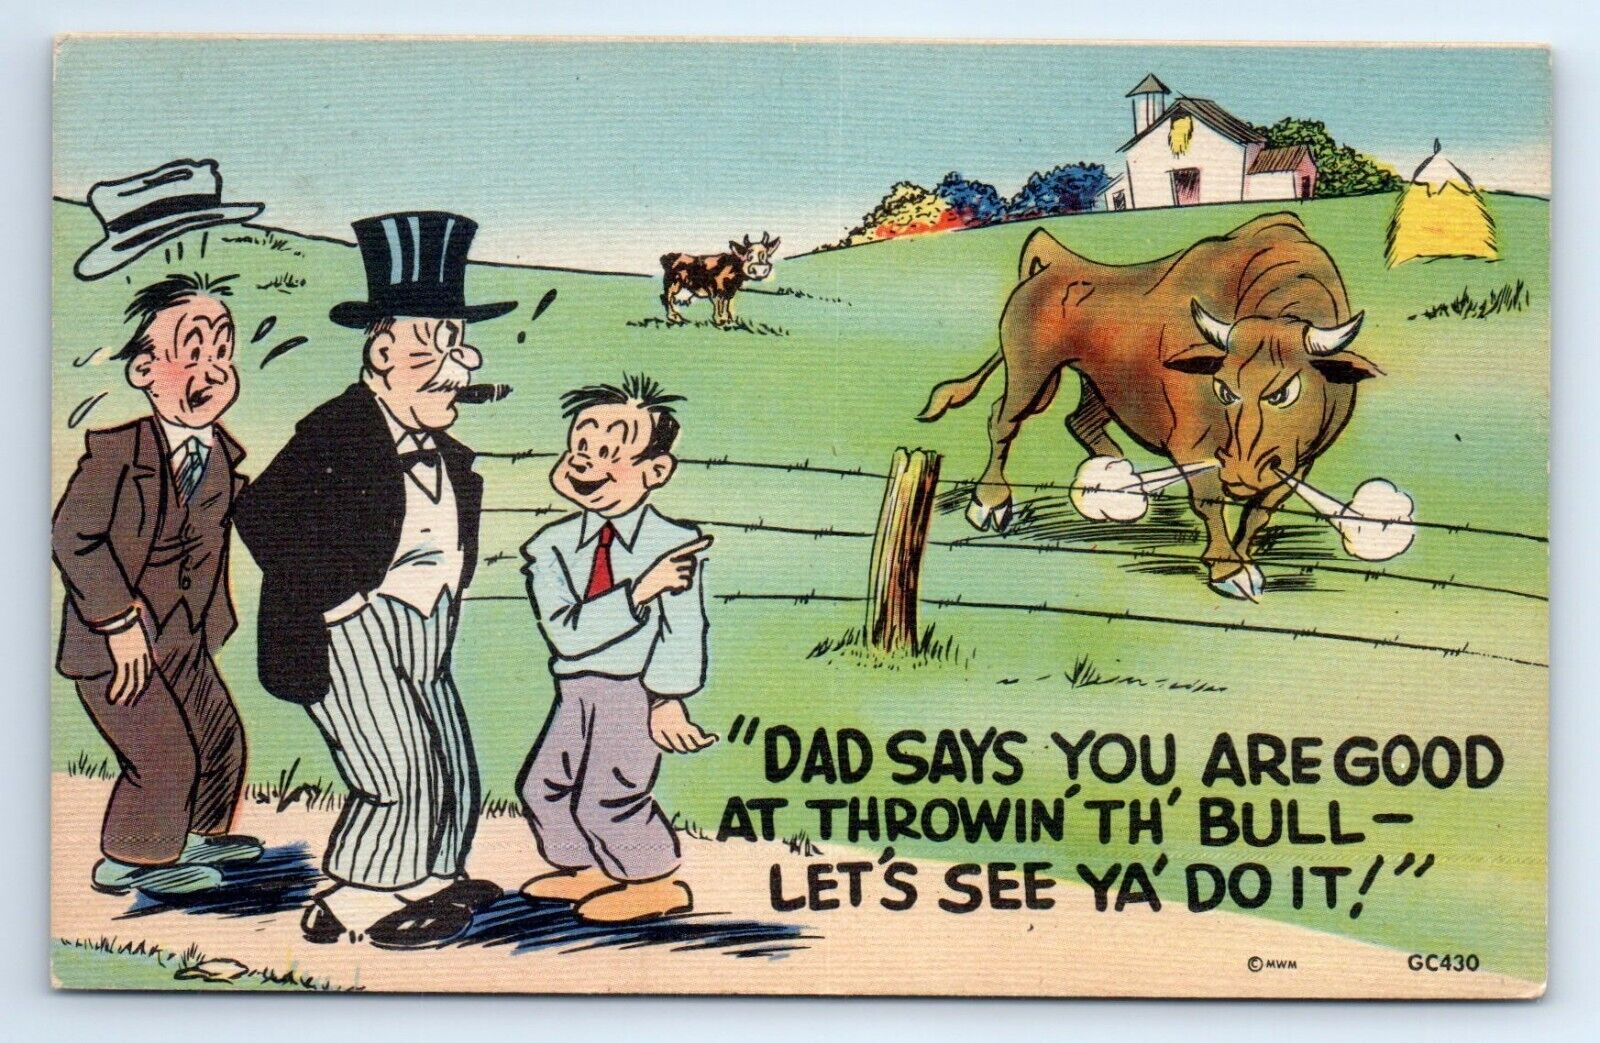 Boss Dad Says You Are Good at Throwing Bull Comic Child Linen Postcard c.1940